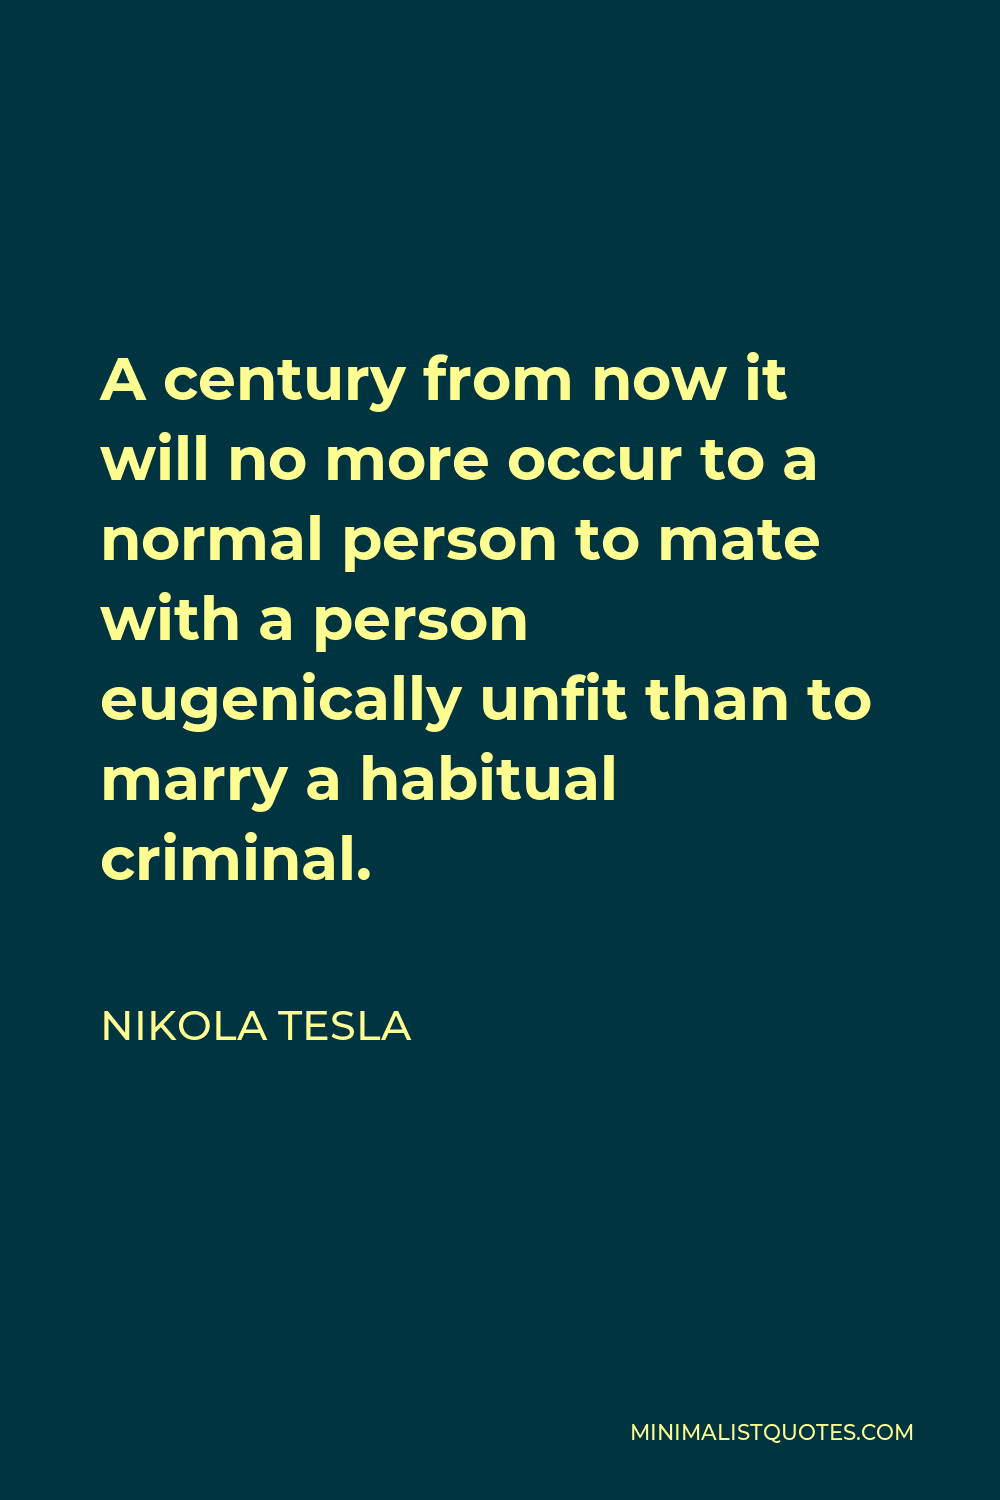 Nikola Tesla Quote - A century from now it will no more occur to a normal person to mate with a person eugenically unfit than to marry a habitual criminal.